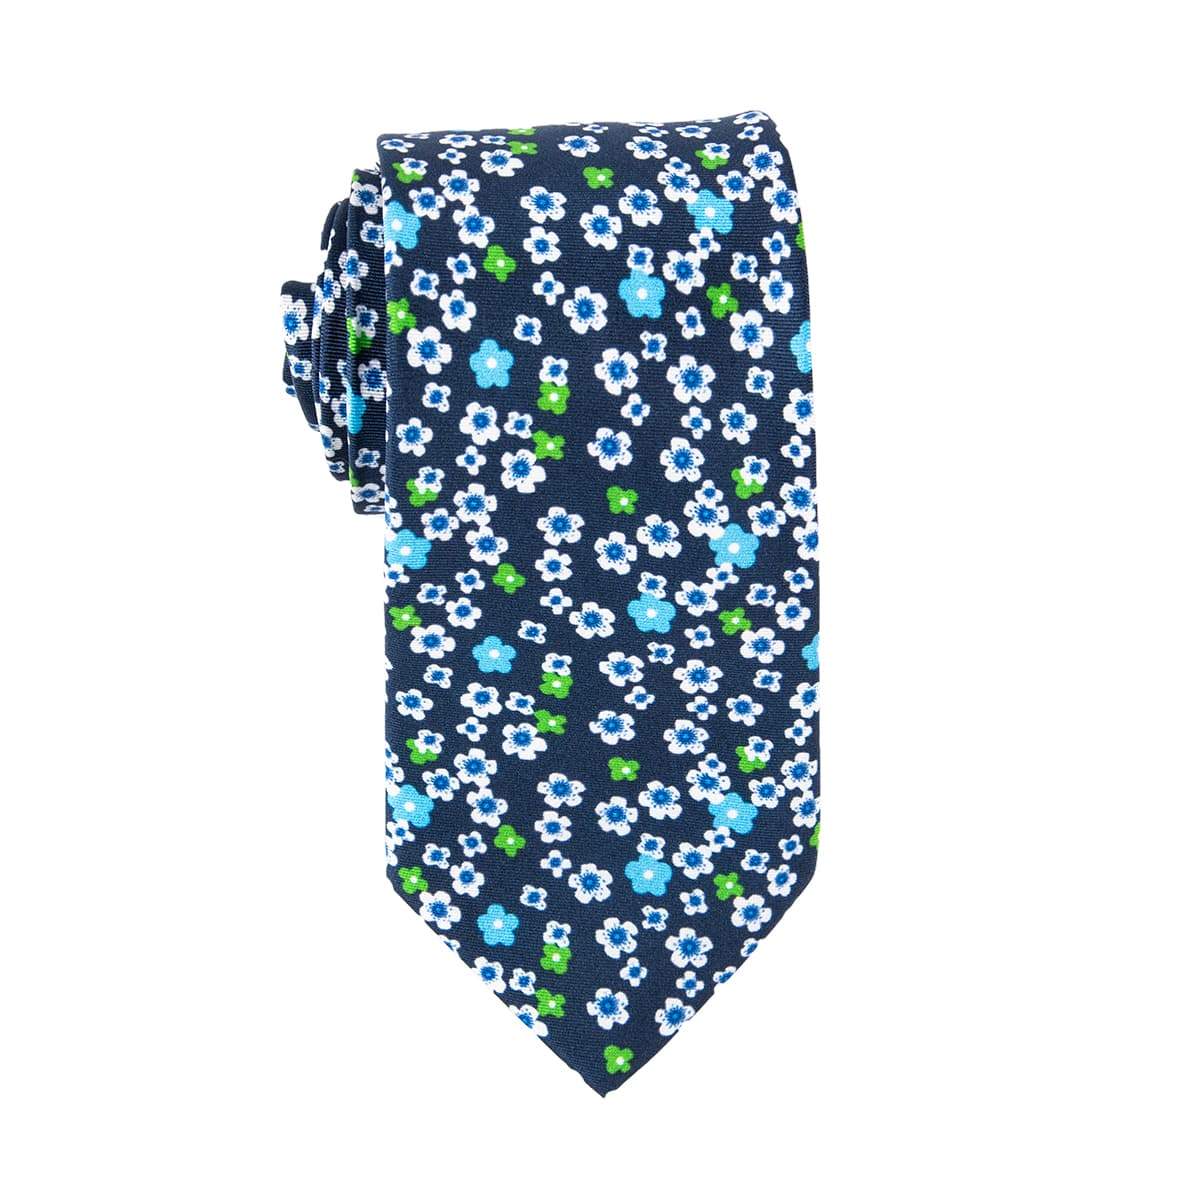 Navy Tie with Mini White, Light Blue, and Green Floral Design